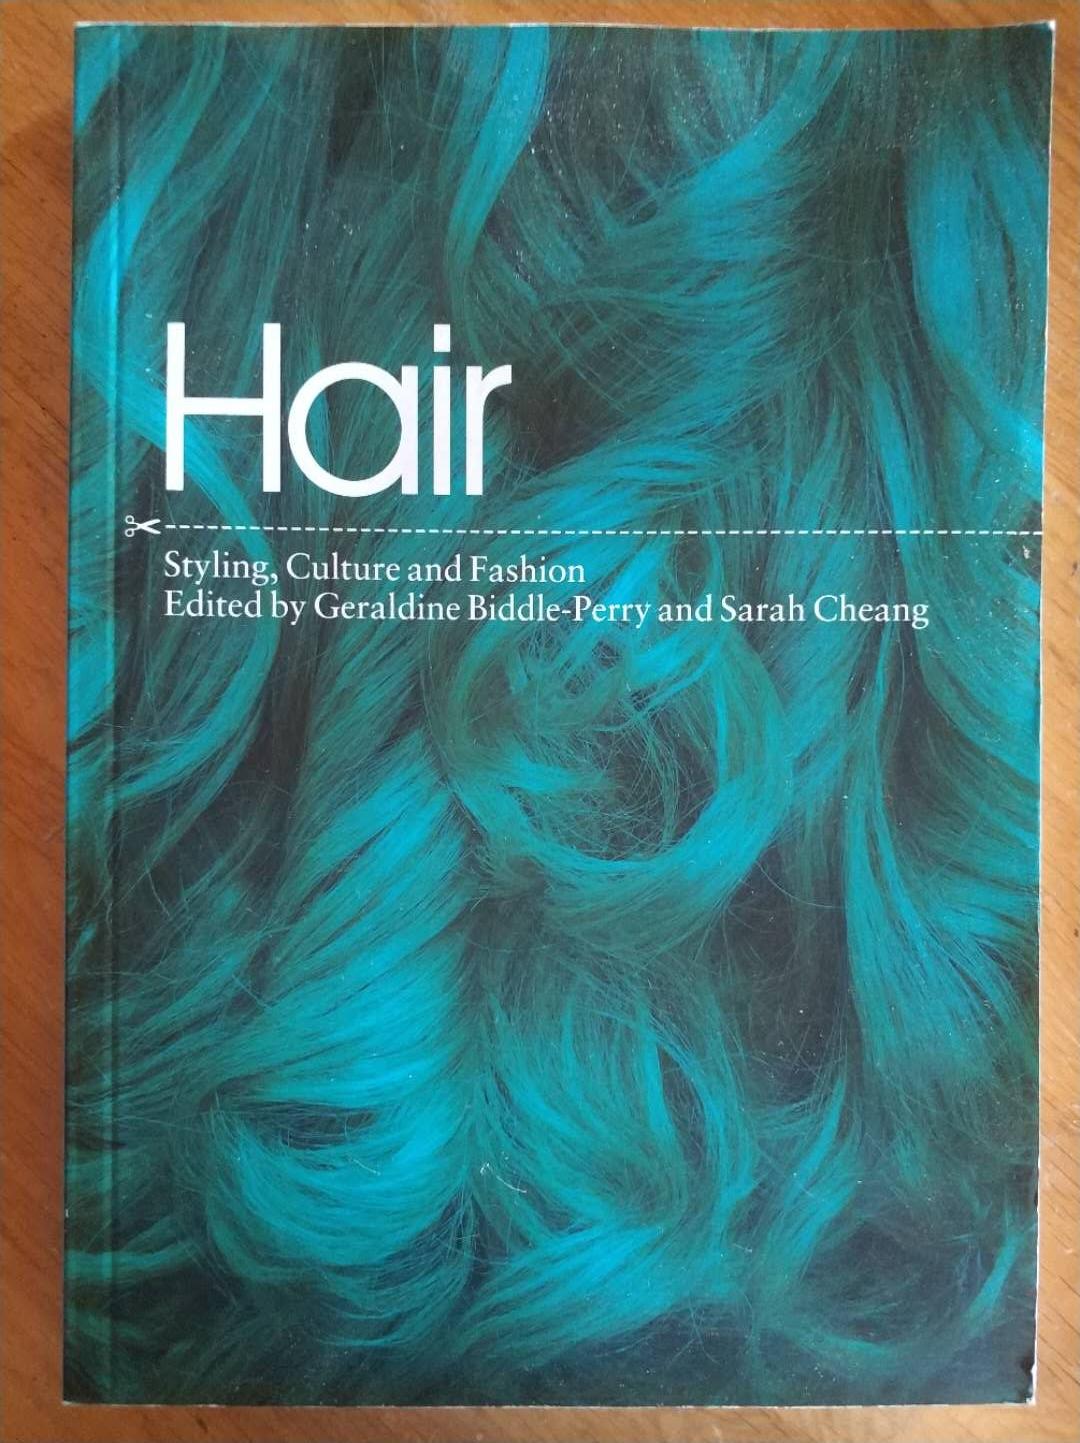 Hair: Styling, Culture and Fashion  头发：造型、文化与时尚